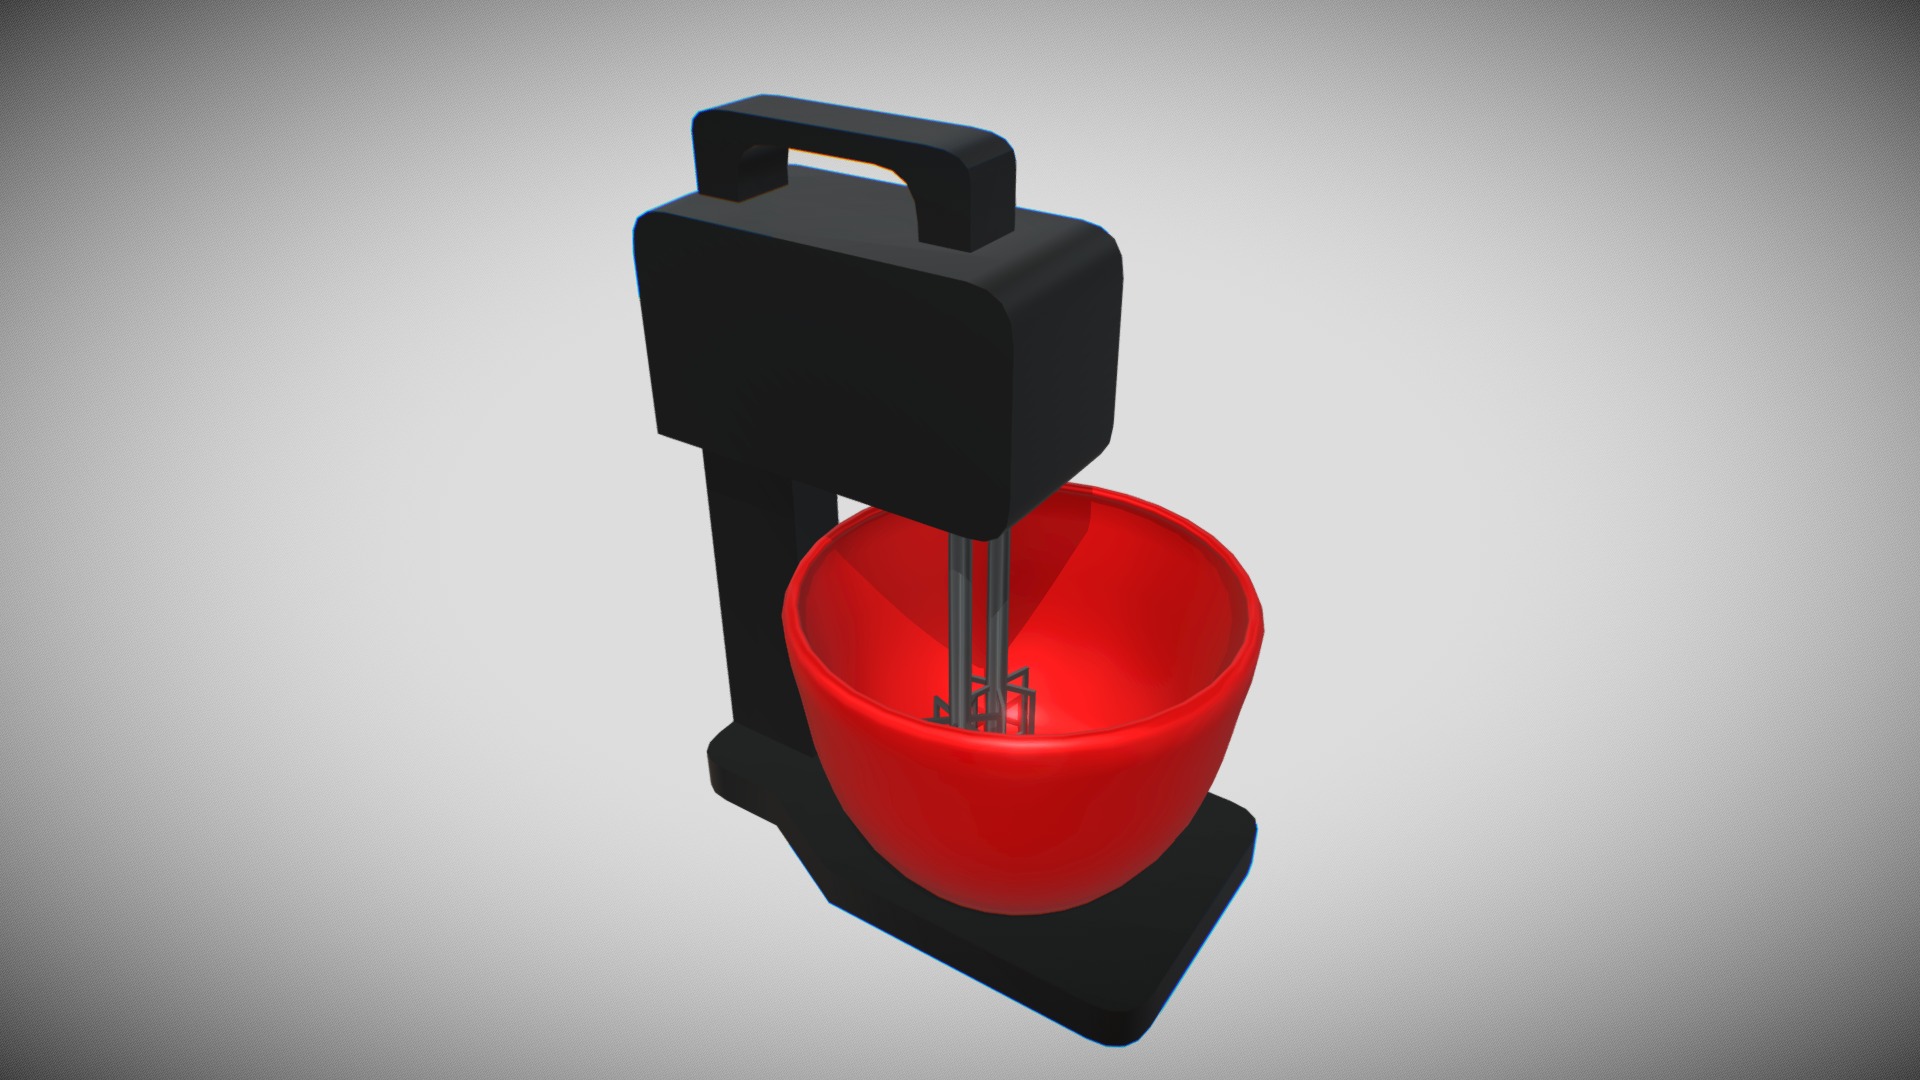 3D model Mixer – low poly - This is a 3D model of the Mixer - low poly. The 3D model is about a black and red lamp.